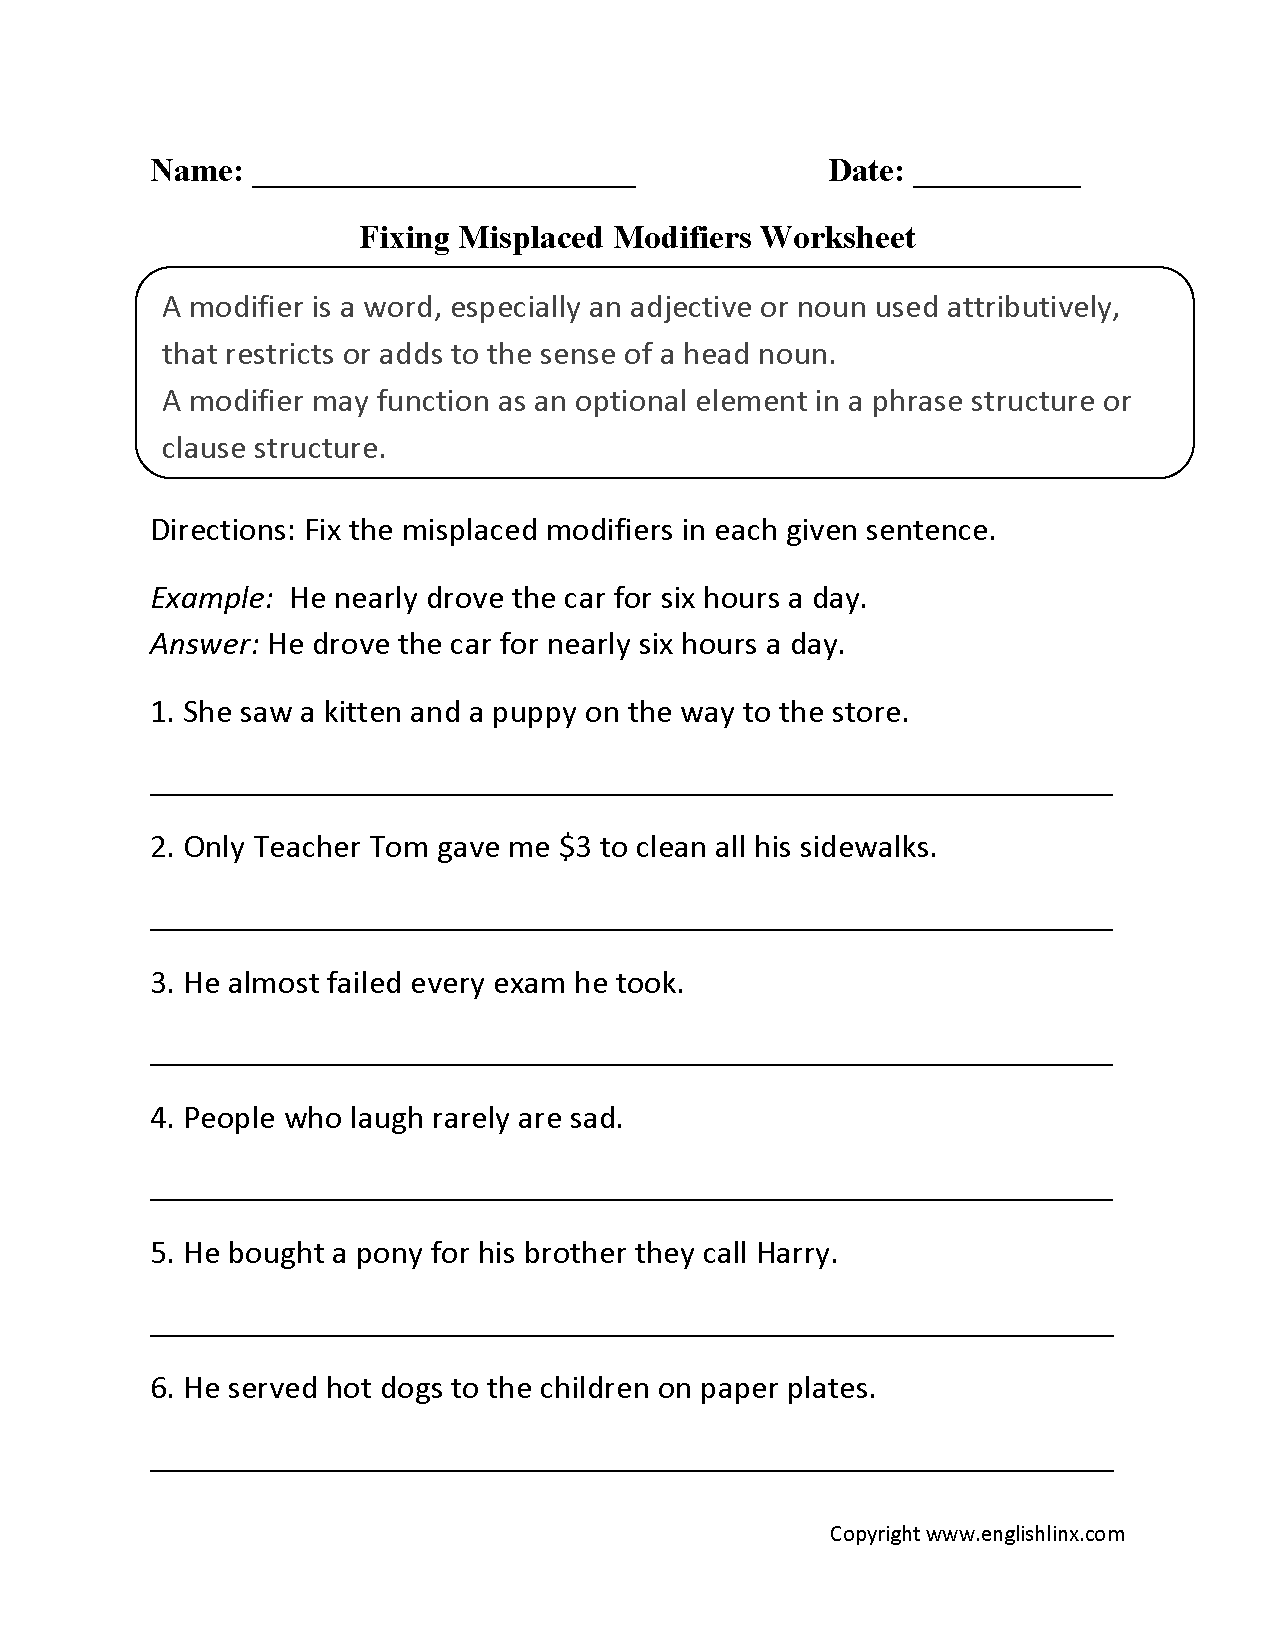 Fixing Misplaced Modifiers Worksheet